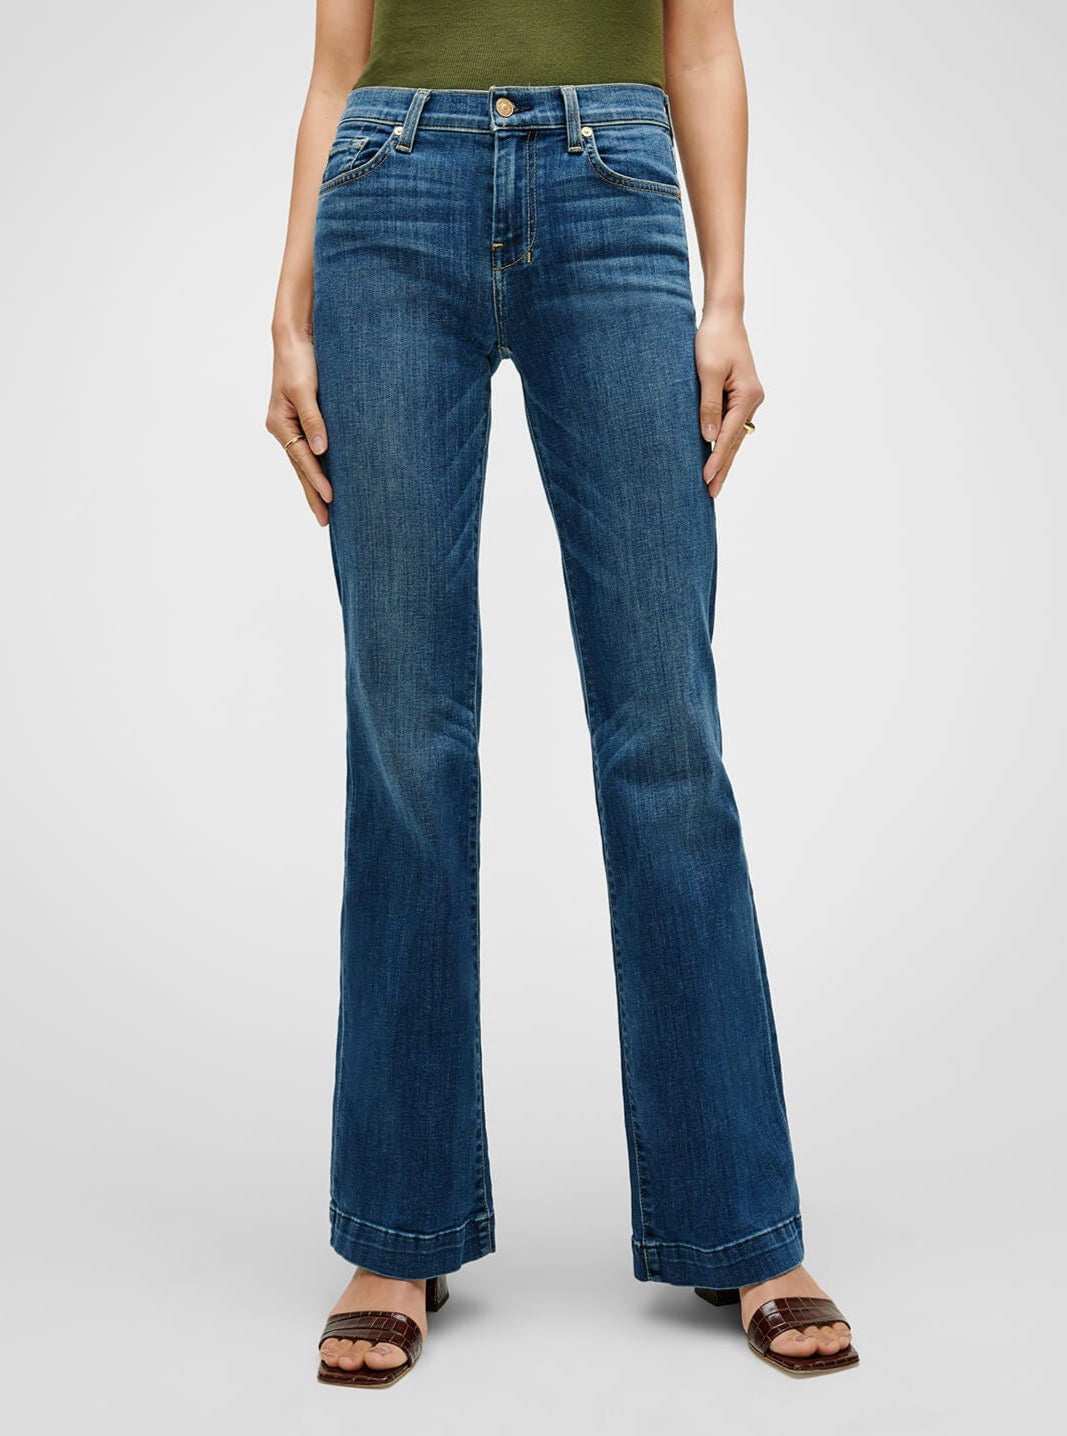 7 For All Mankind Dojo Tailorless in Medium Melrose - Size 31 Available